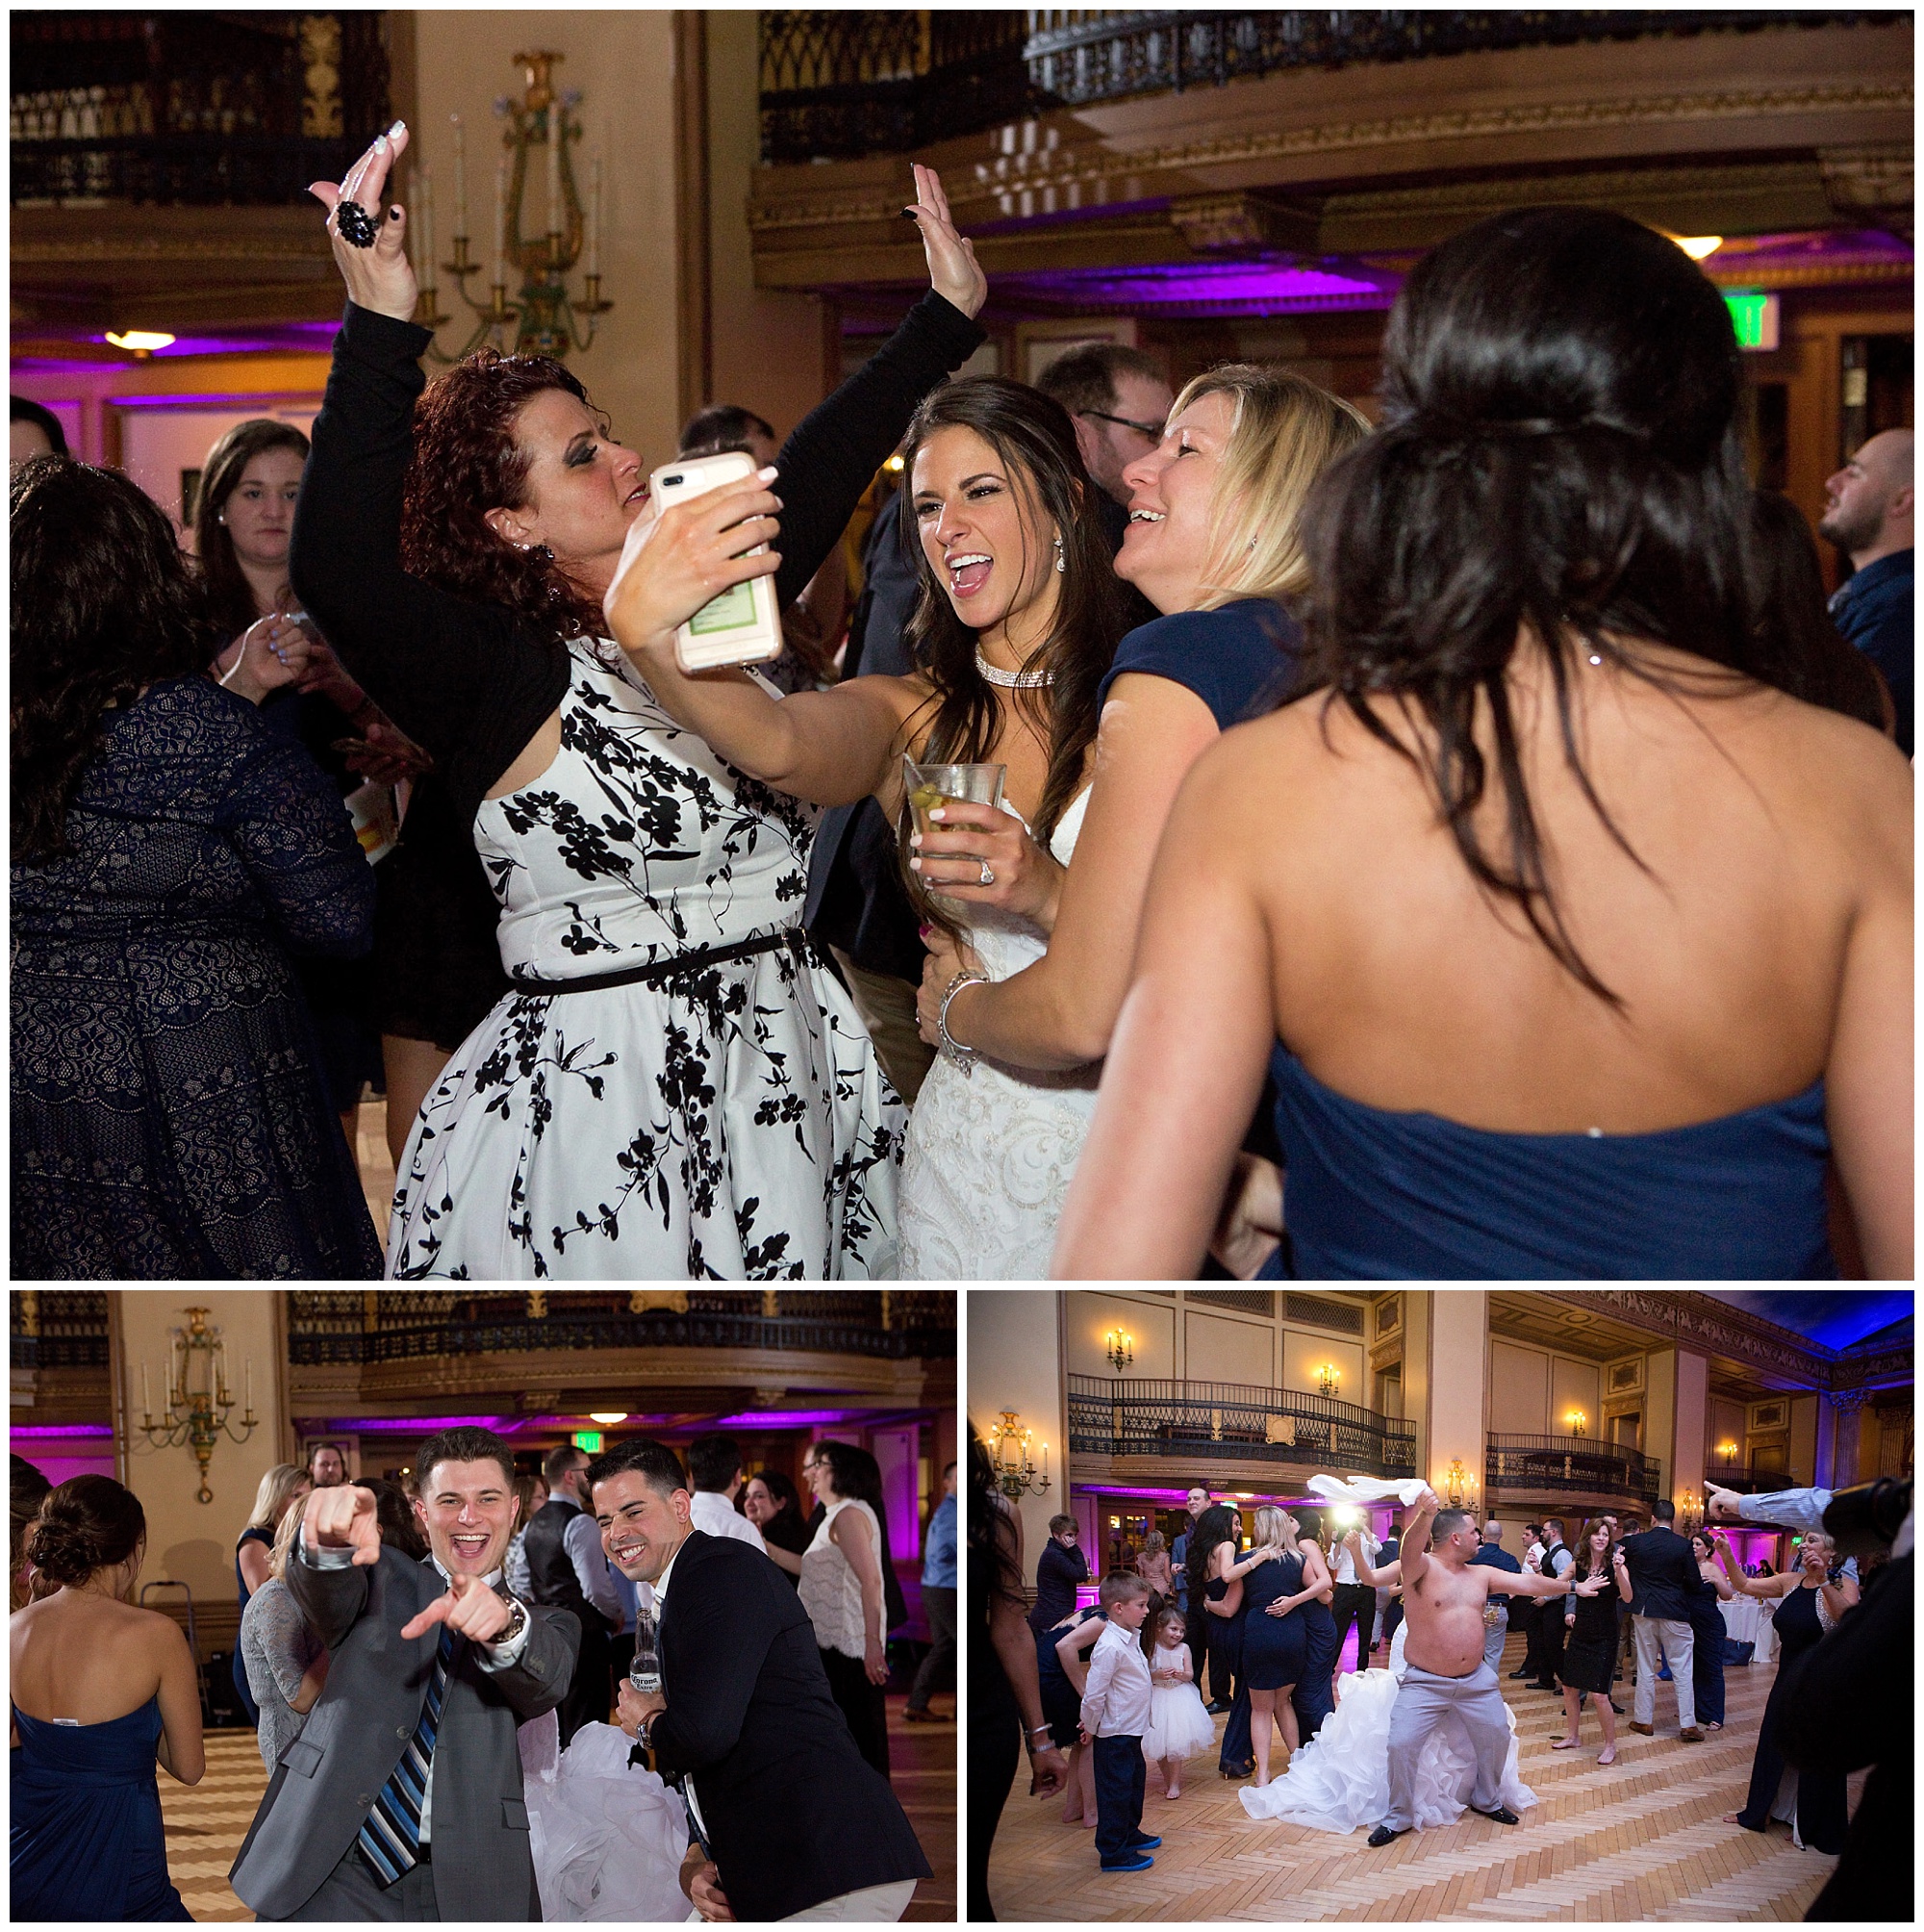 Photos of guests dancing at the wedding reception, and one of the bride taking a selfi photo with her friends